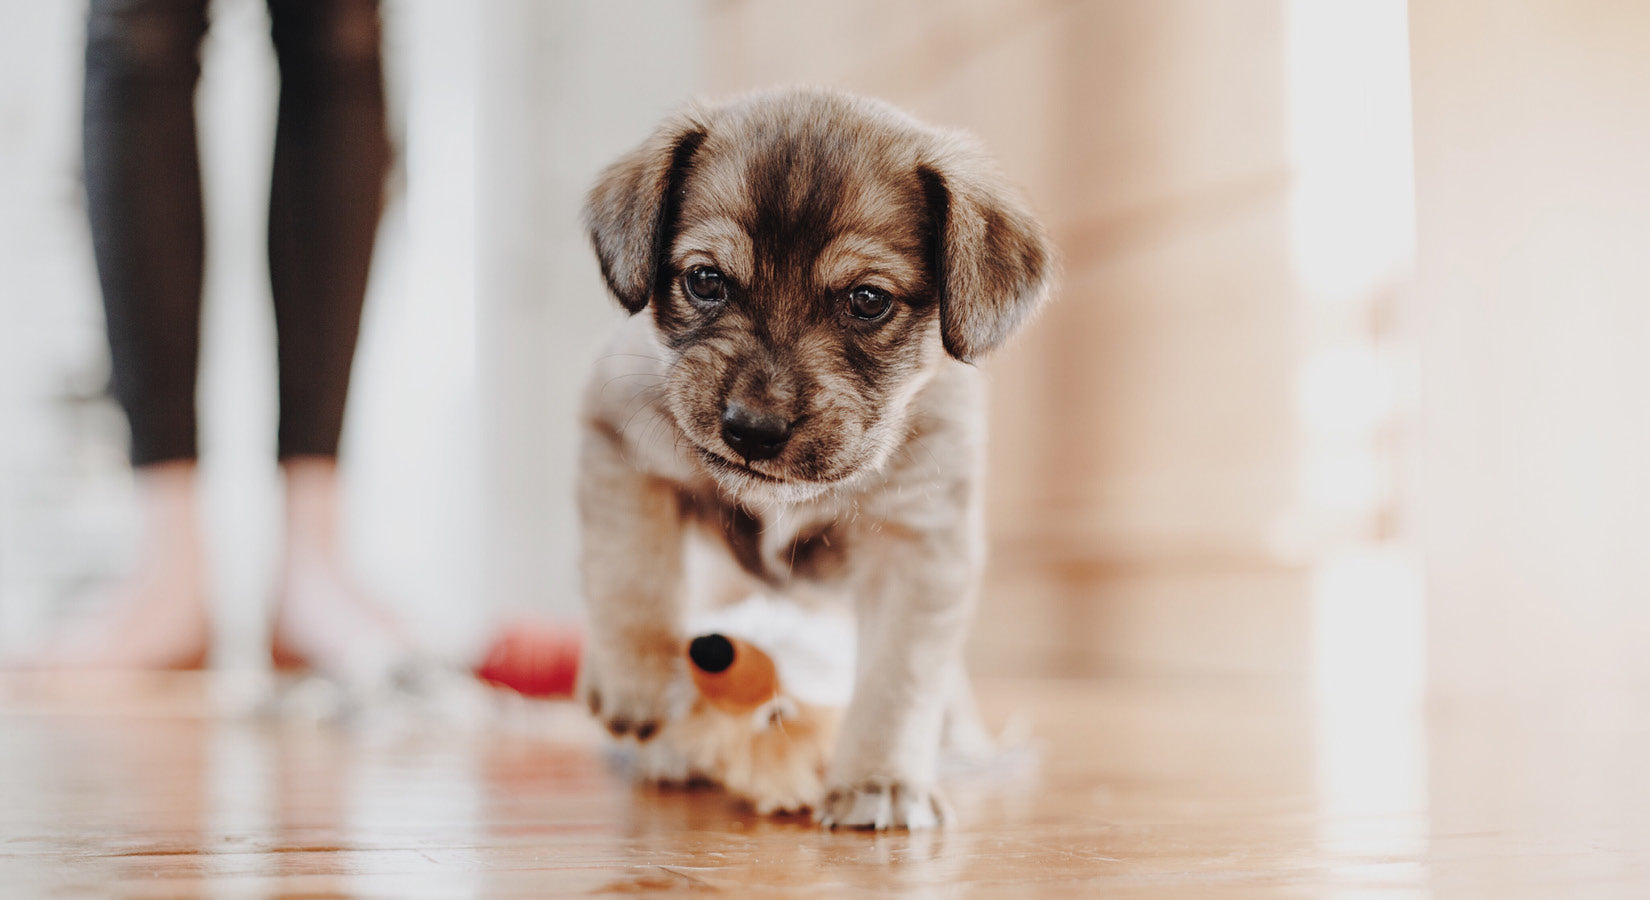 Puppy love – What to prepare for your new arrival